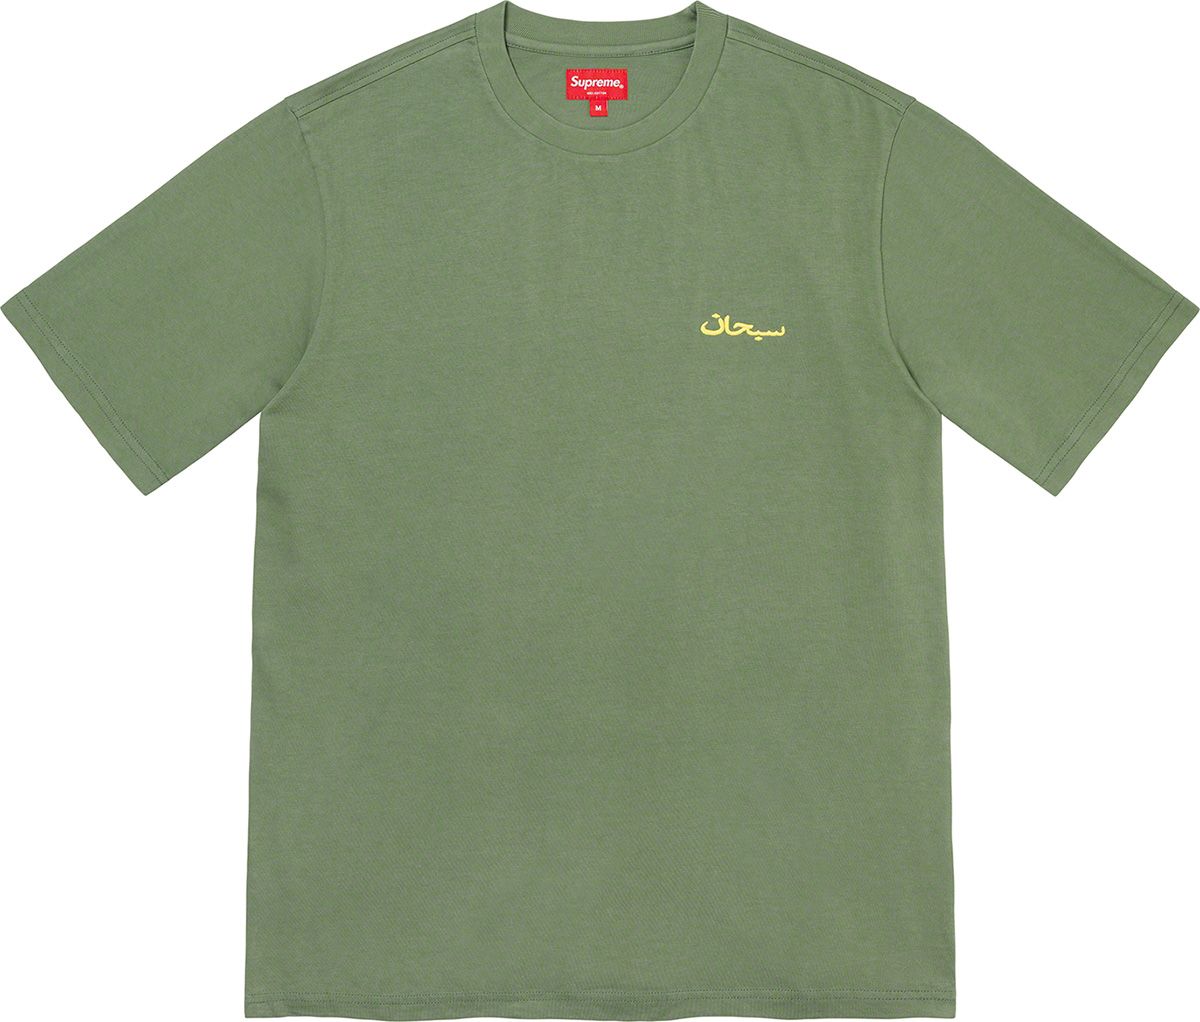 Alpha Omega S/S Top - Fall/Winter 2021 Preview – Supreme